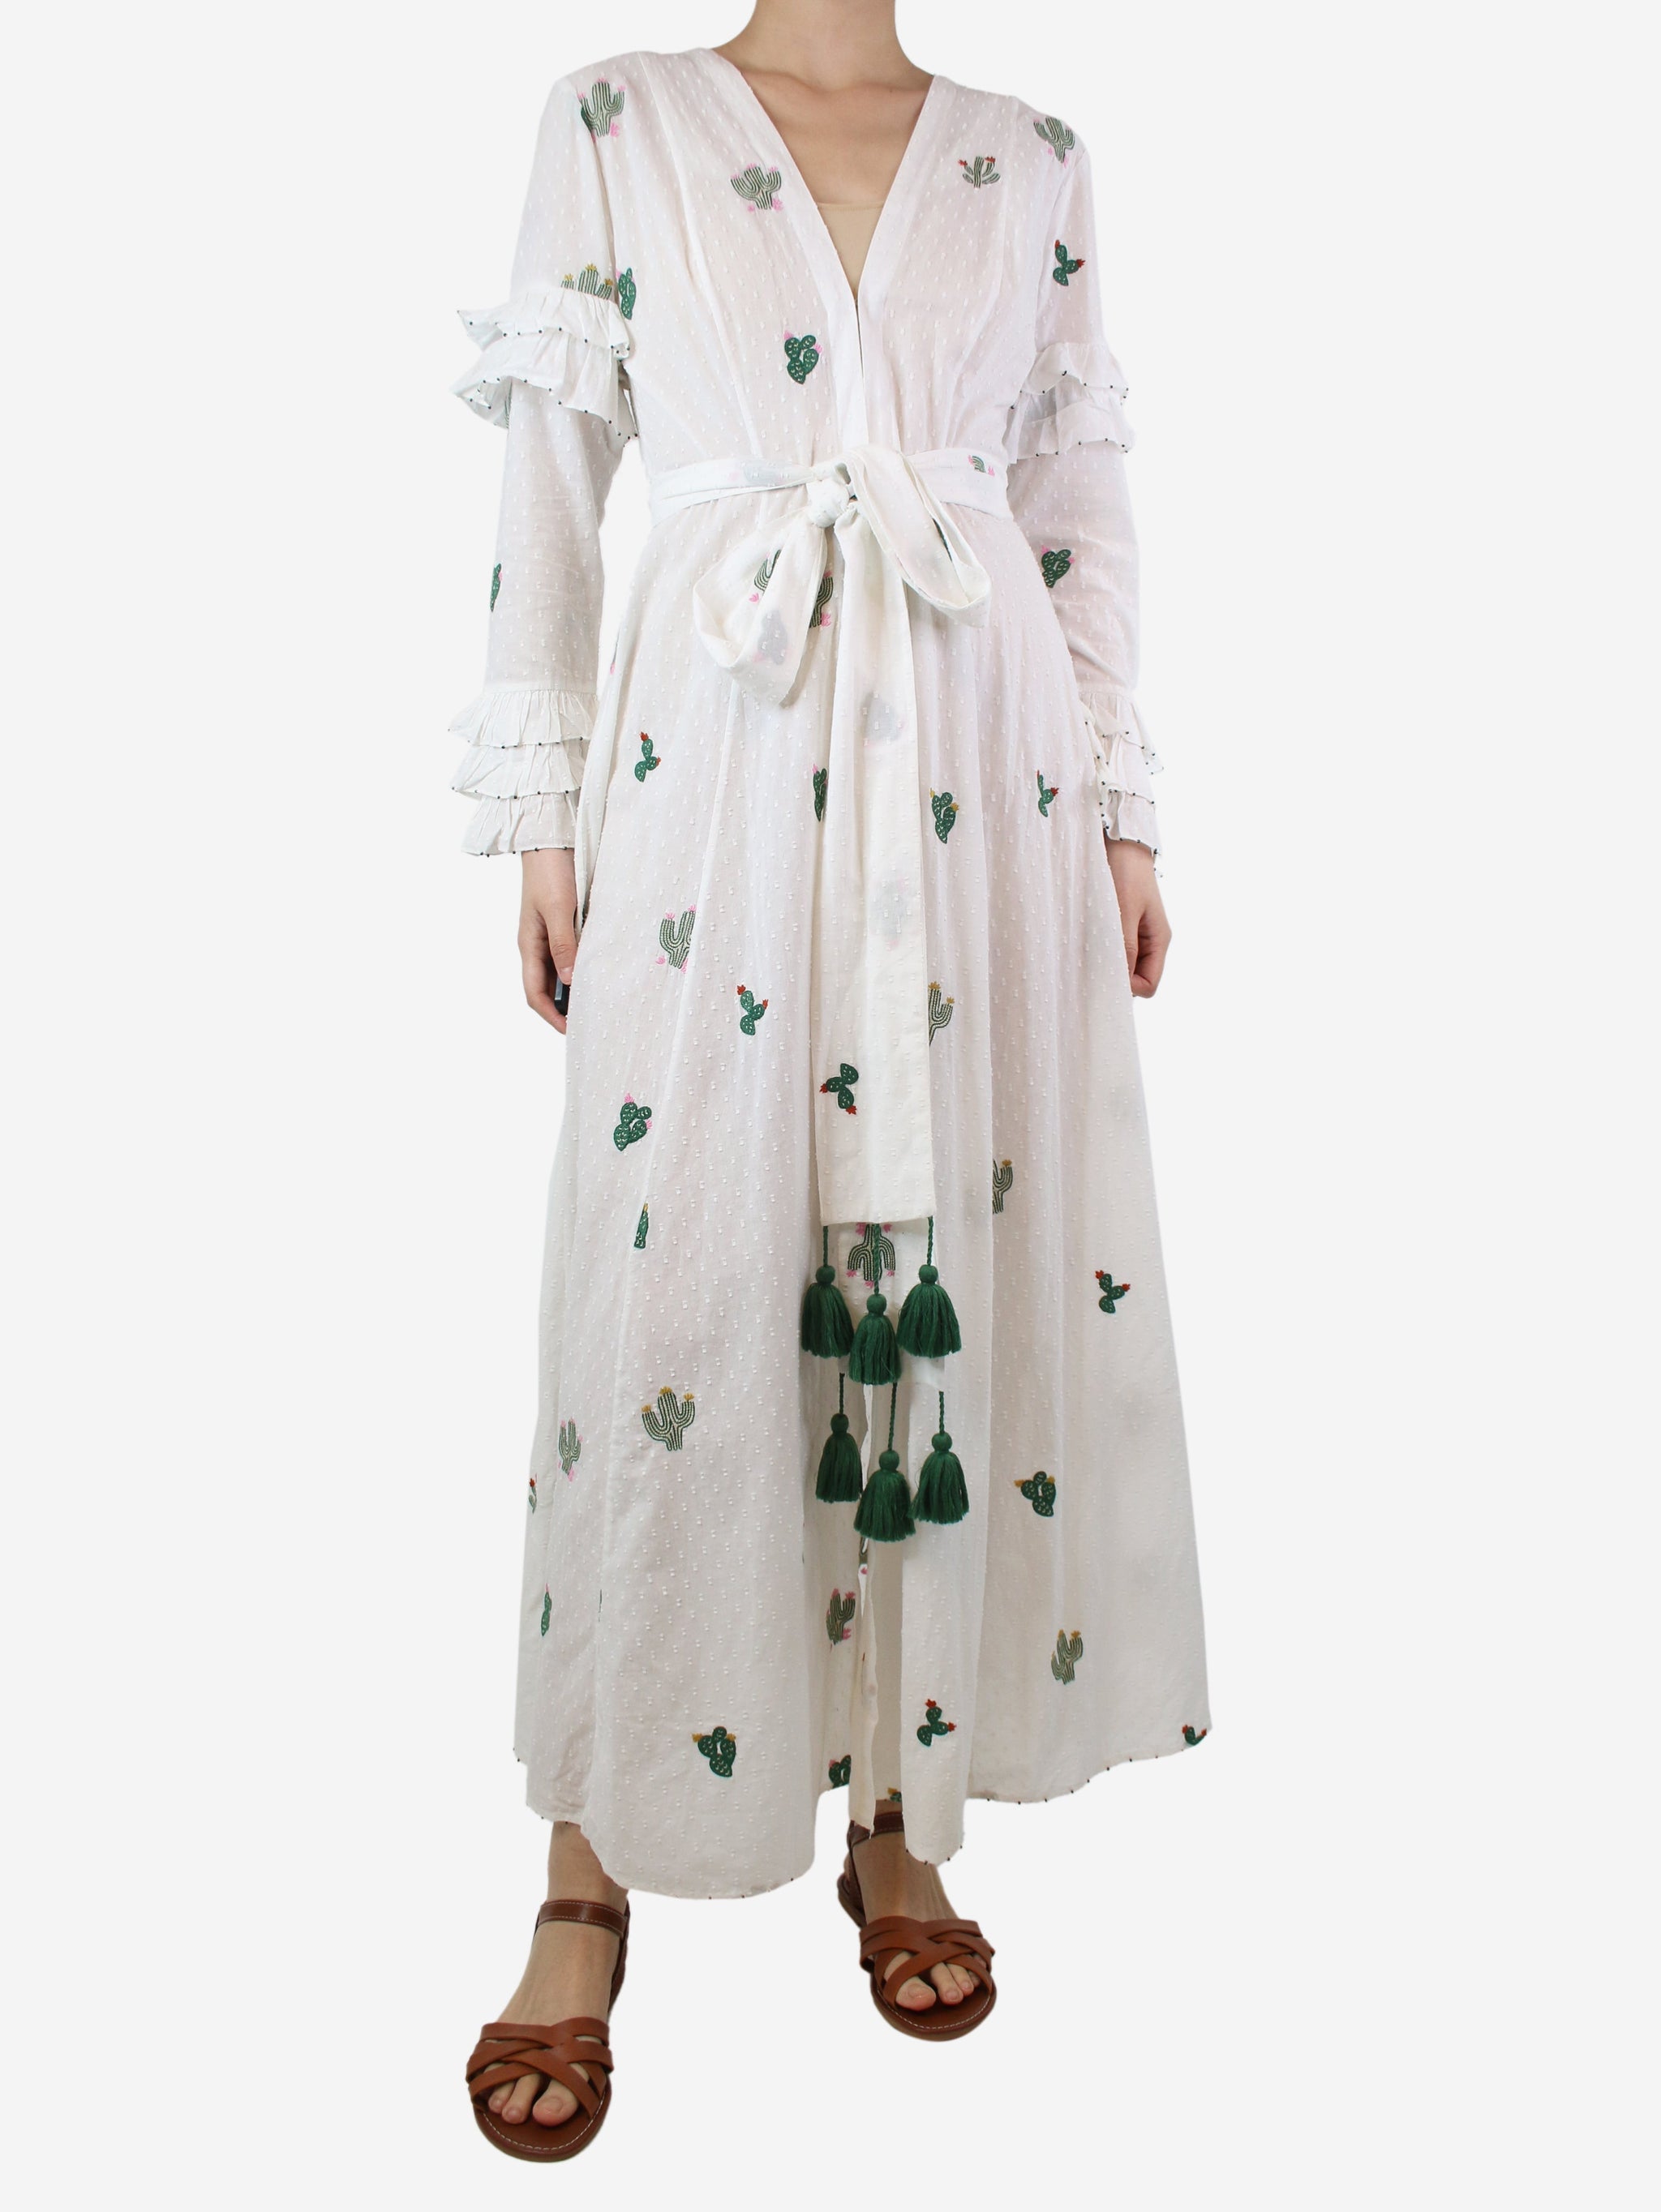 We Are Leone pre-owned white textured cactus embroidered dress - size S ...